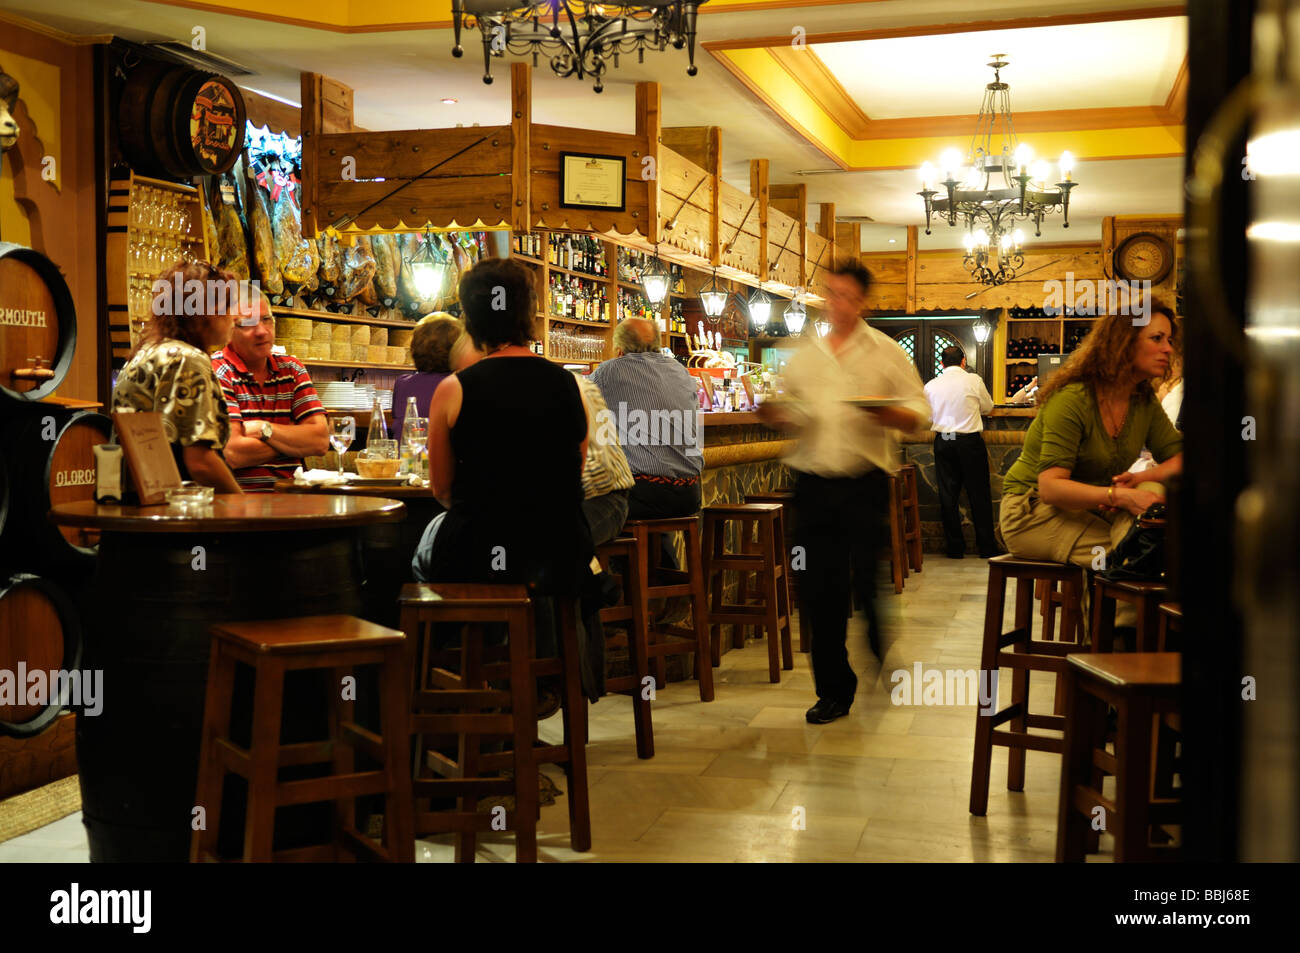 Ronda Spain Bar High Resolution Stock Photography and Images - Alamy